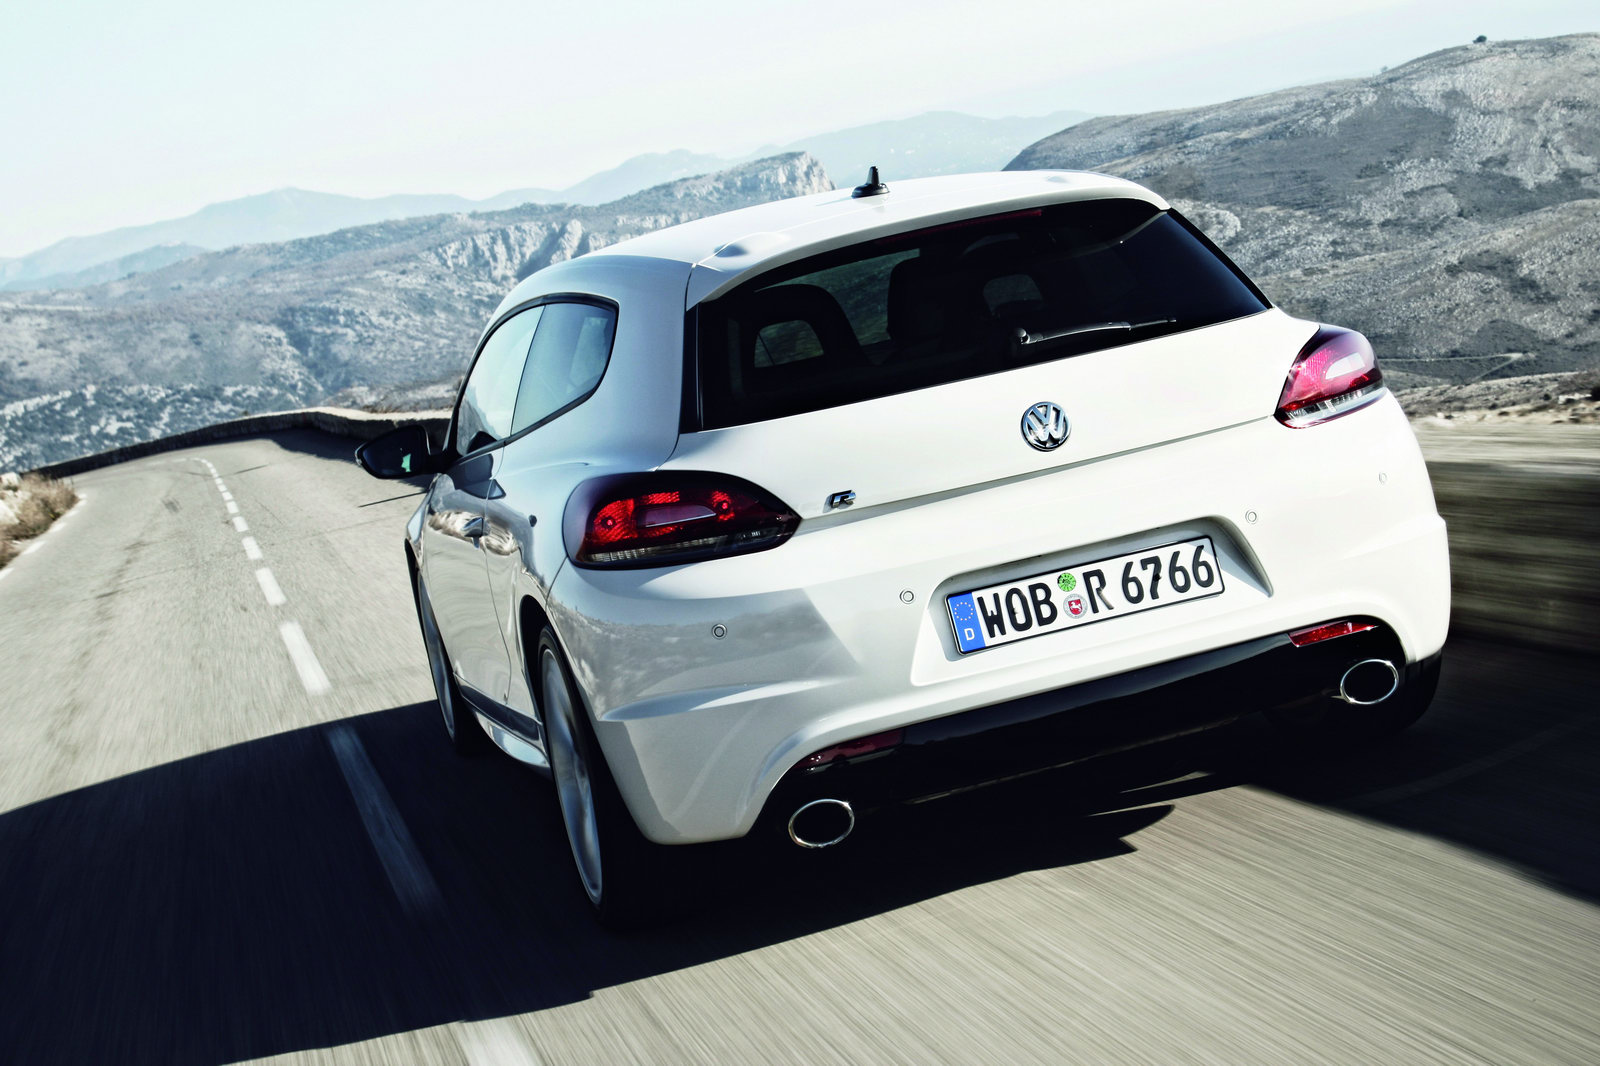 VW Scirocco Beside View. VW Scirocco REar View